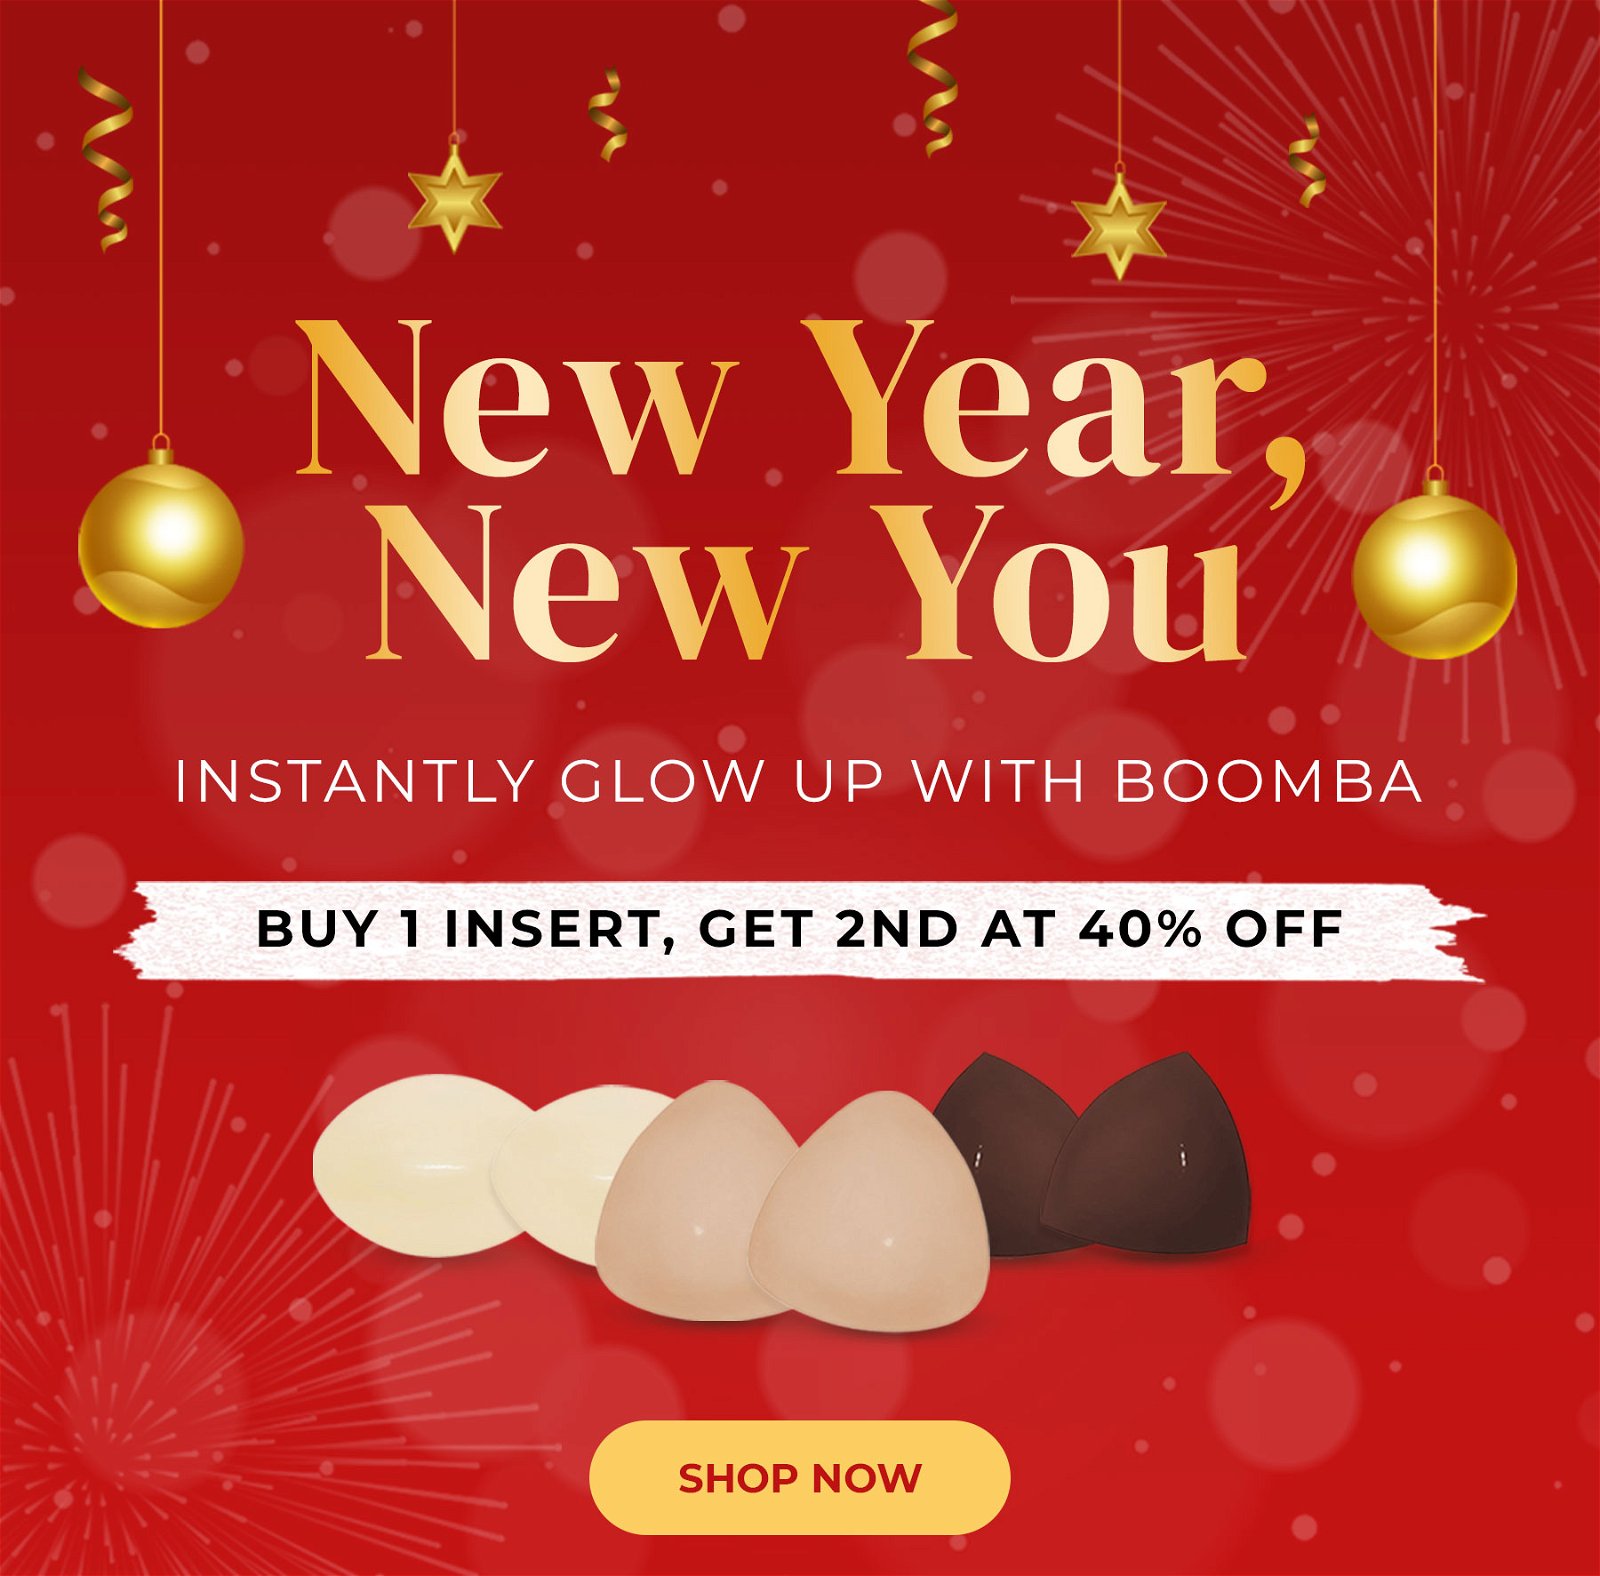 BOOMBA: The Newest BOOMBA Bundle Has Arrived